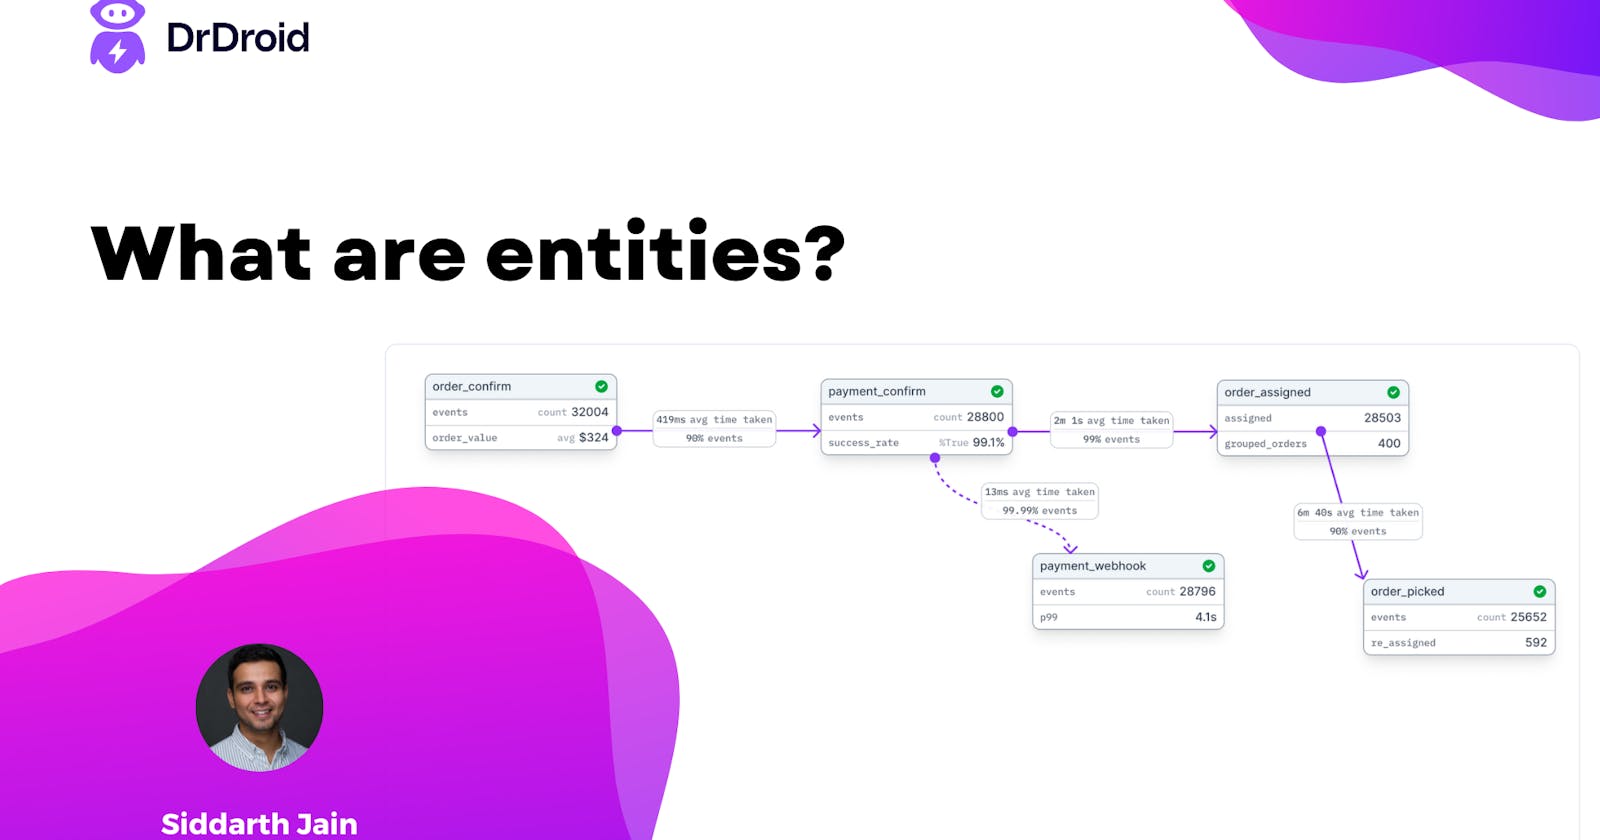 What are entities?